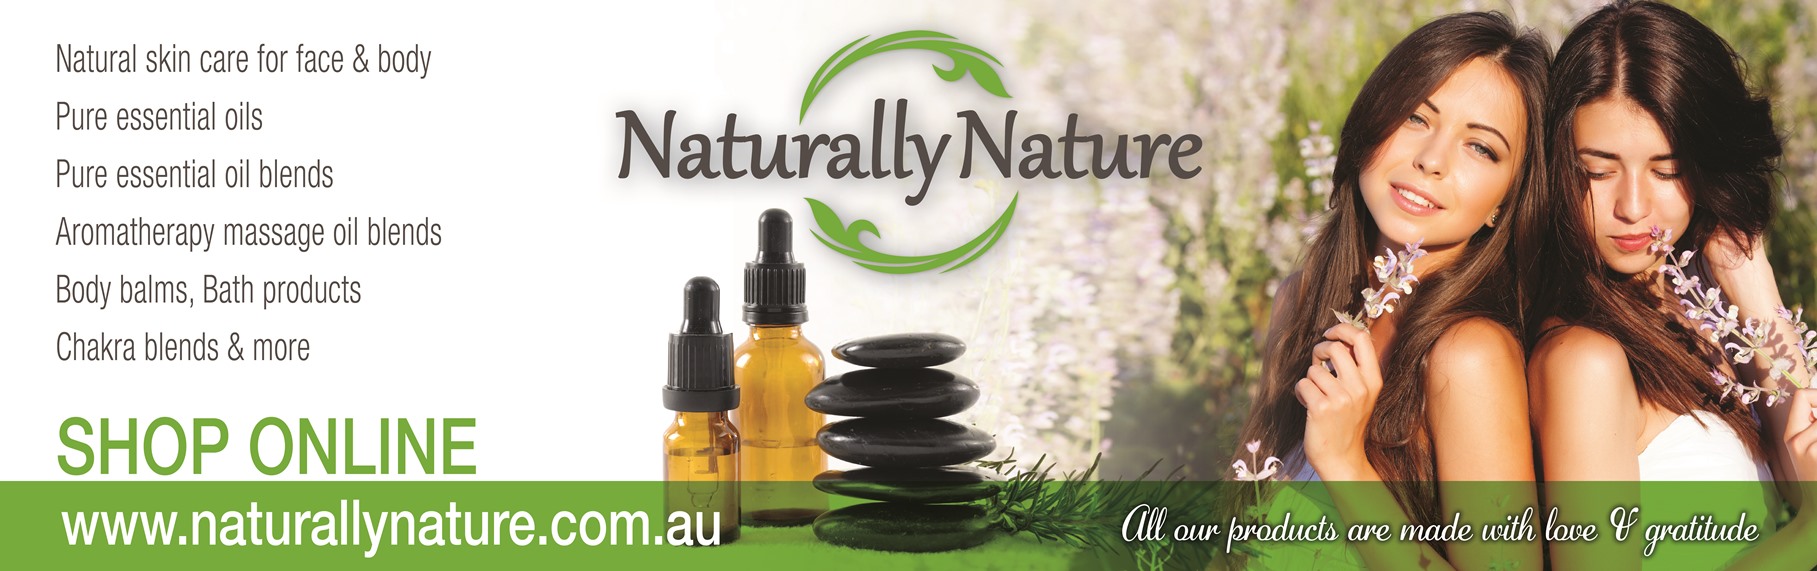 Naturally Nature, pure Essential Oils, Aromatherapy products